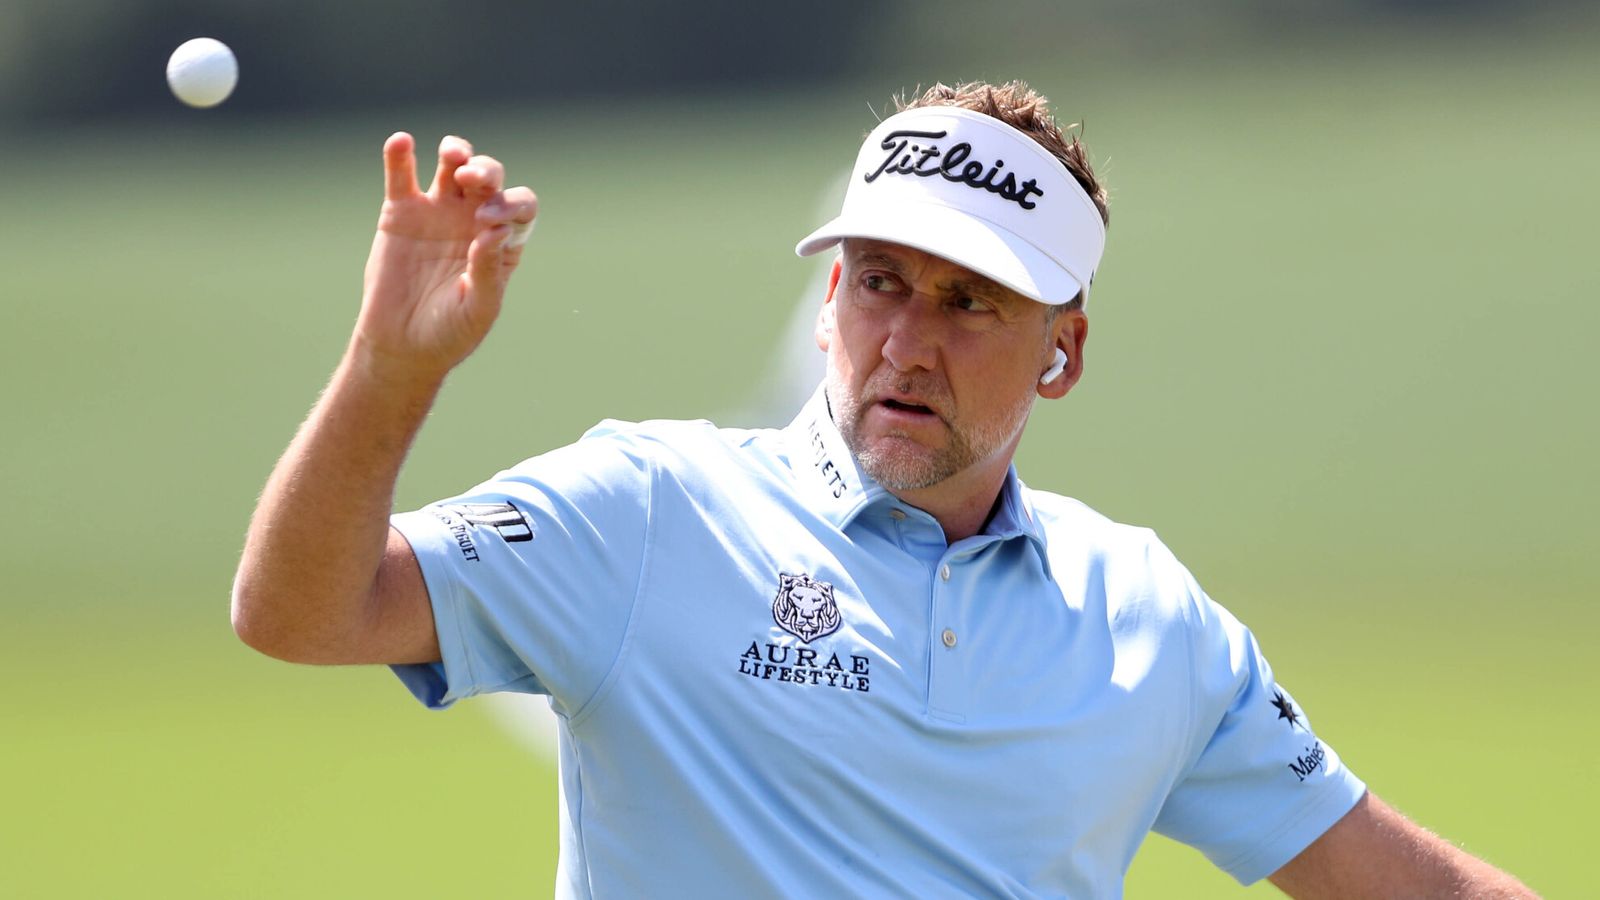 LIV Golf trio Ian Poulter, Justin Harding and Adrian Otaegui granted stay to play at Scottish Open